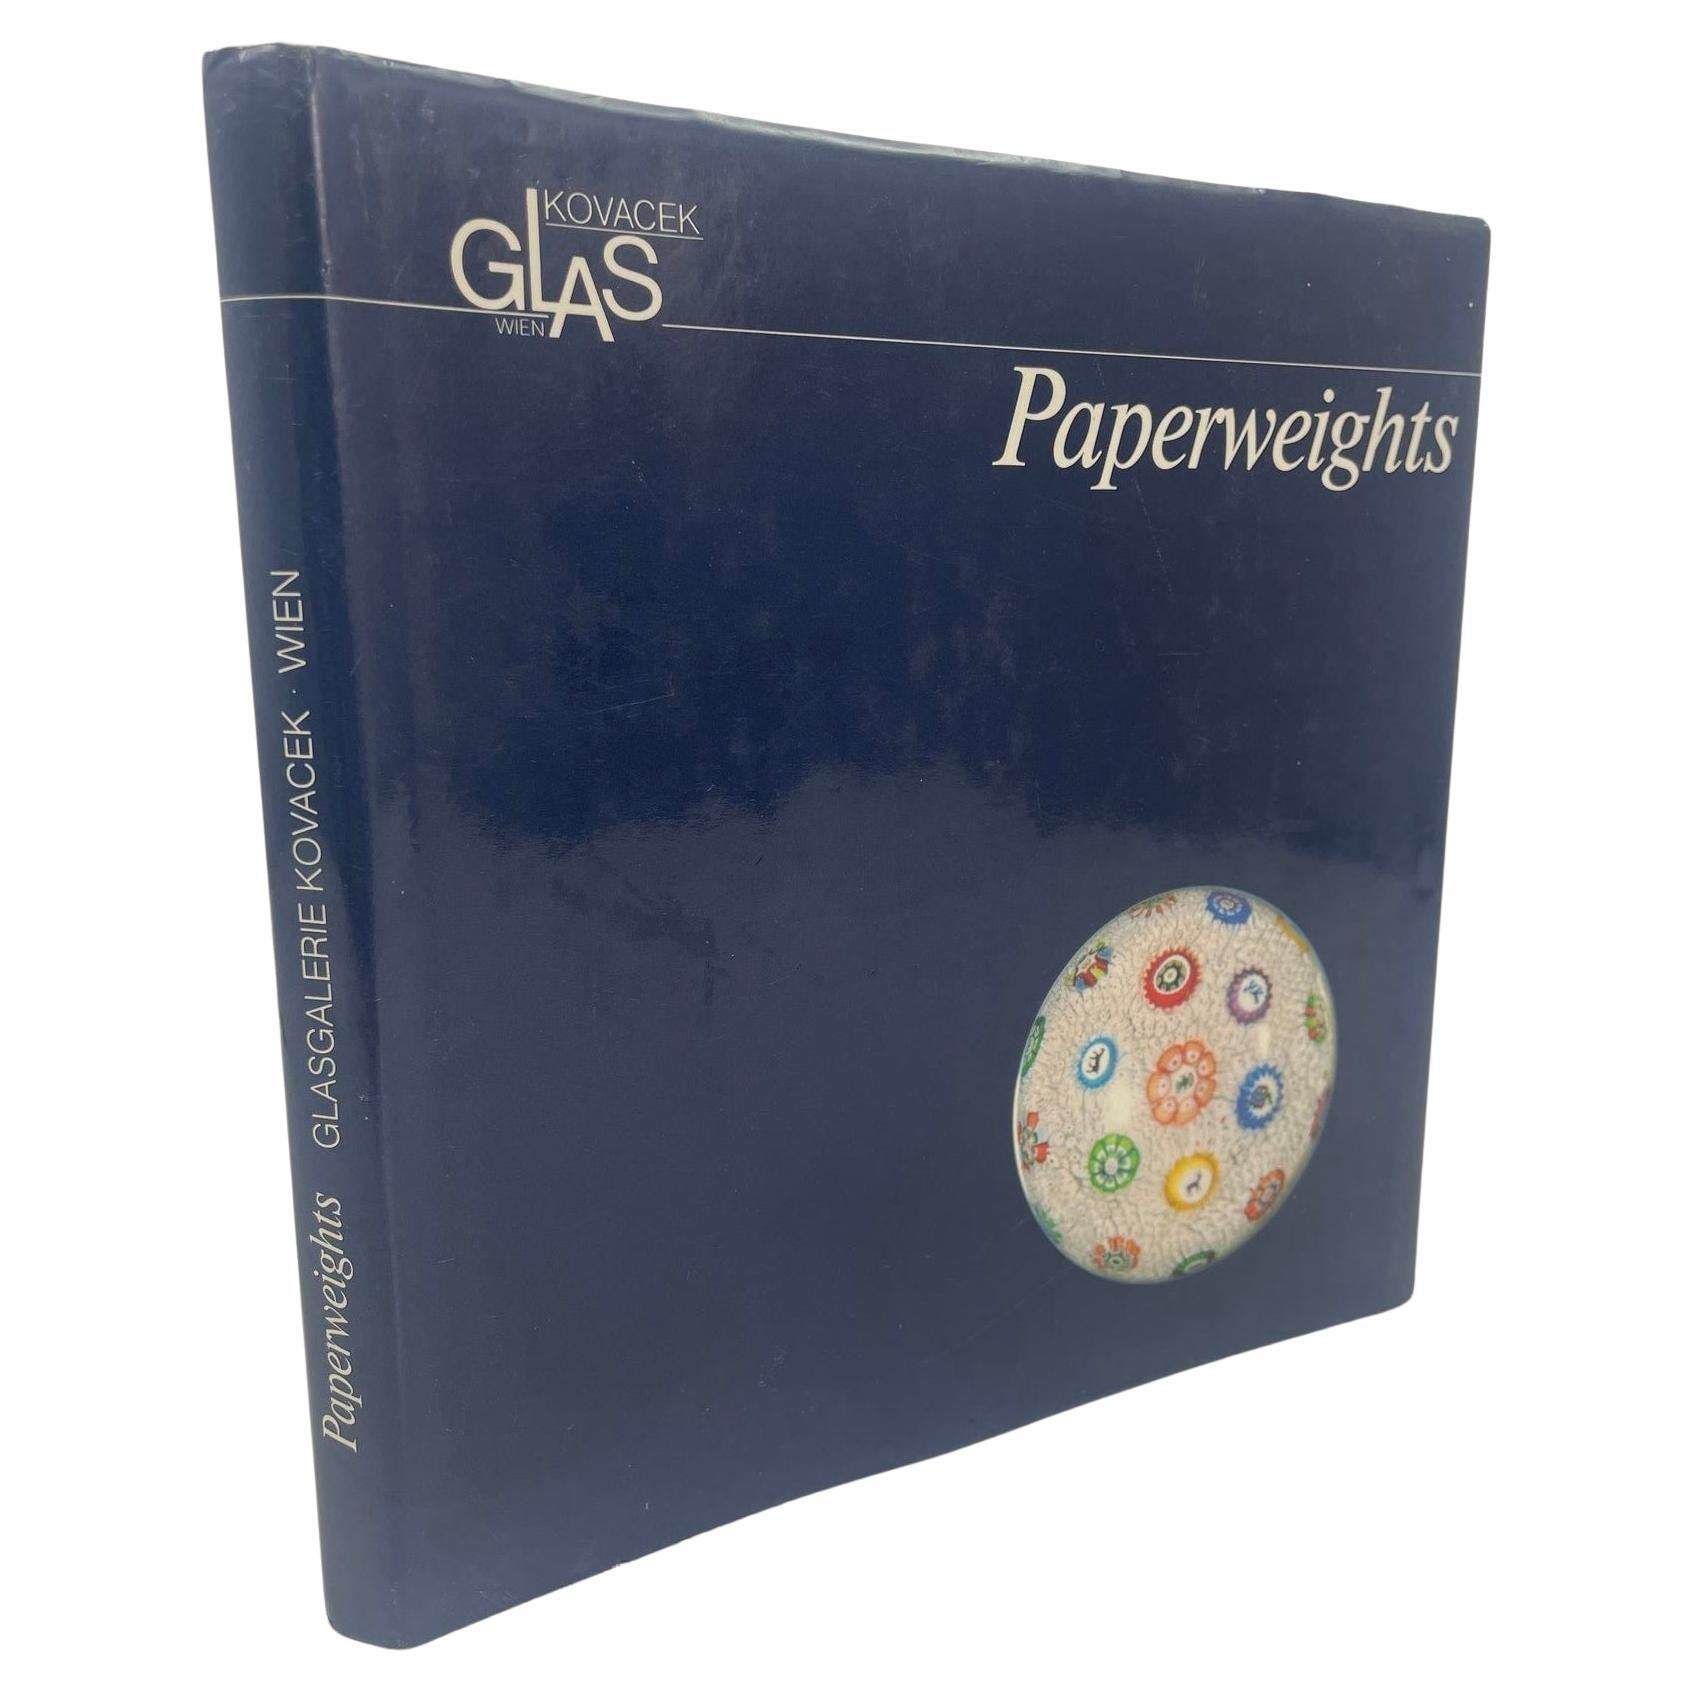 Paperweights Glass Gallery Michael Kovacek Vienna 1987 Hardcover Reference Book